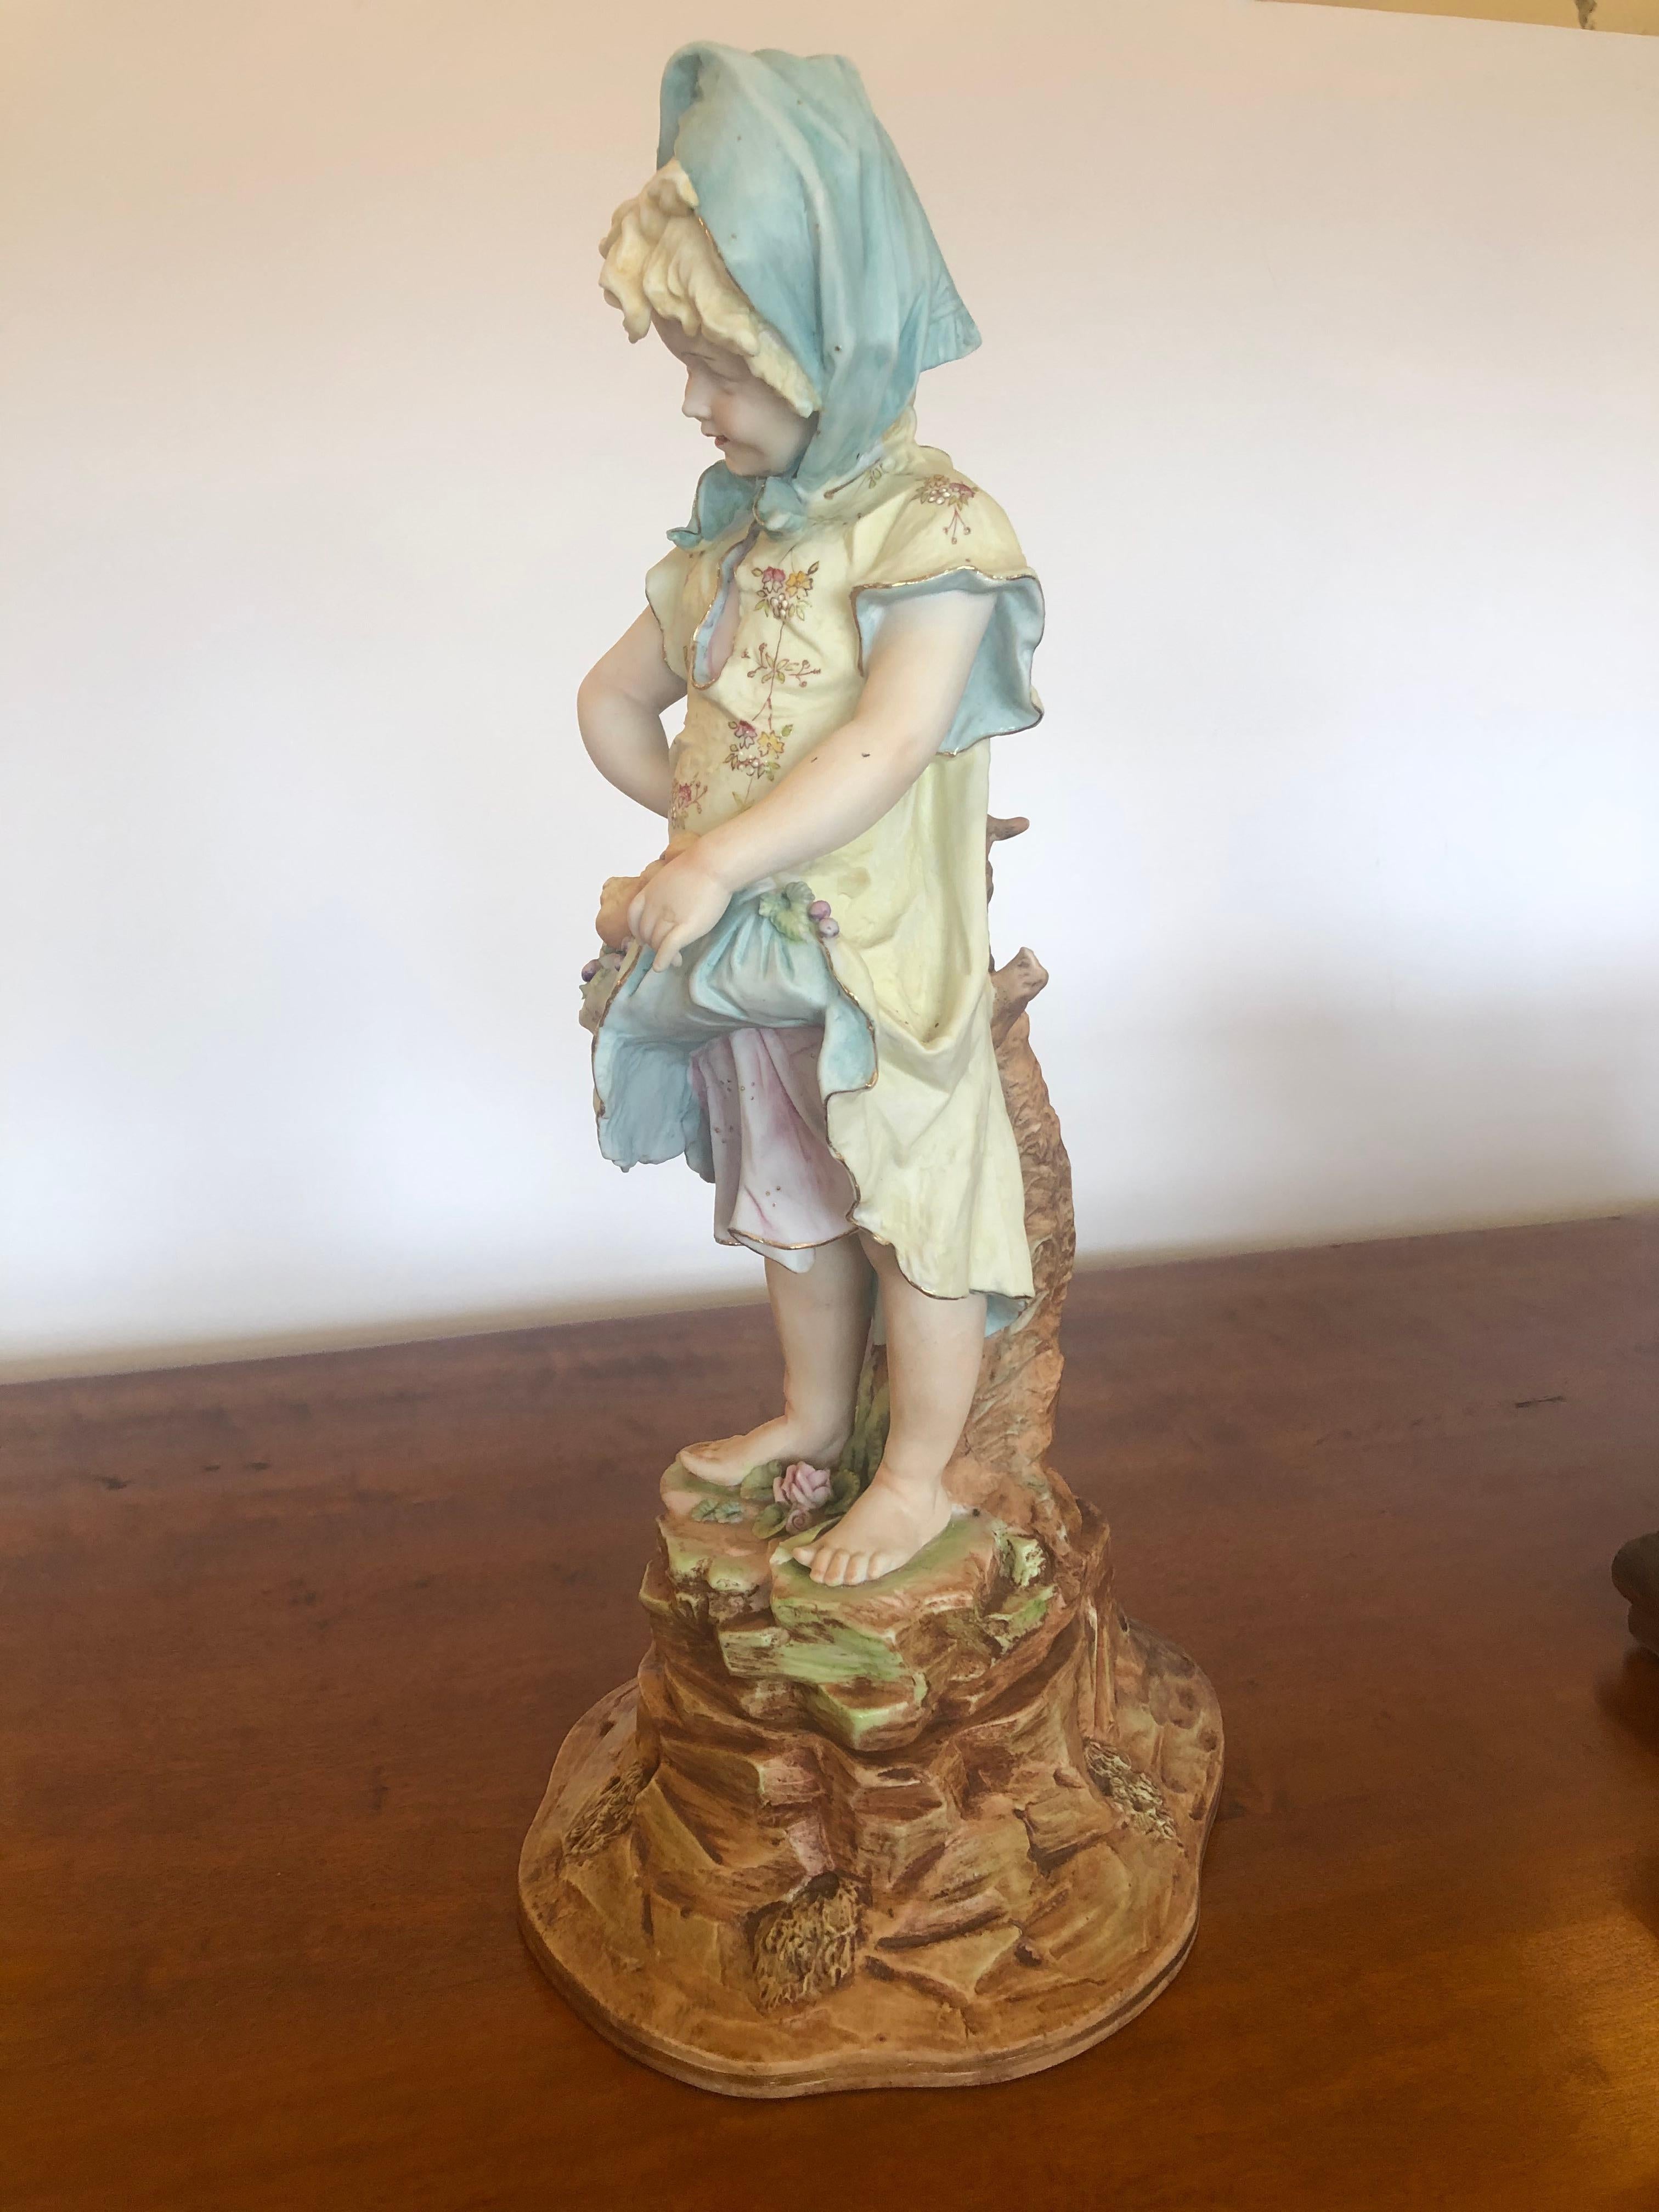 Charming Large Antique Hand Painted Parian Porcelain Figure of a Girl For Sale 2